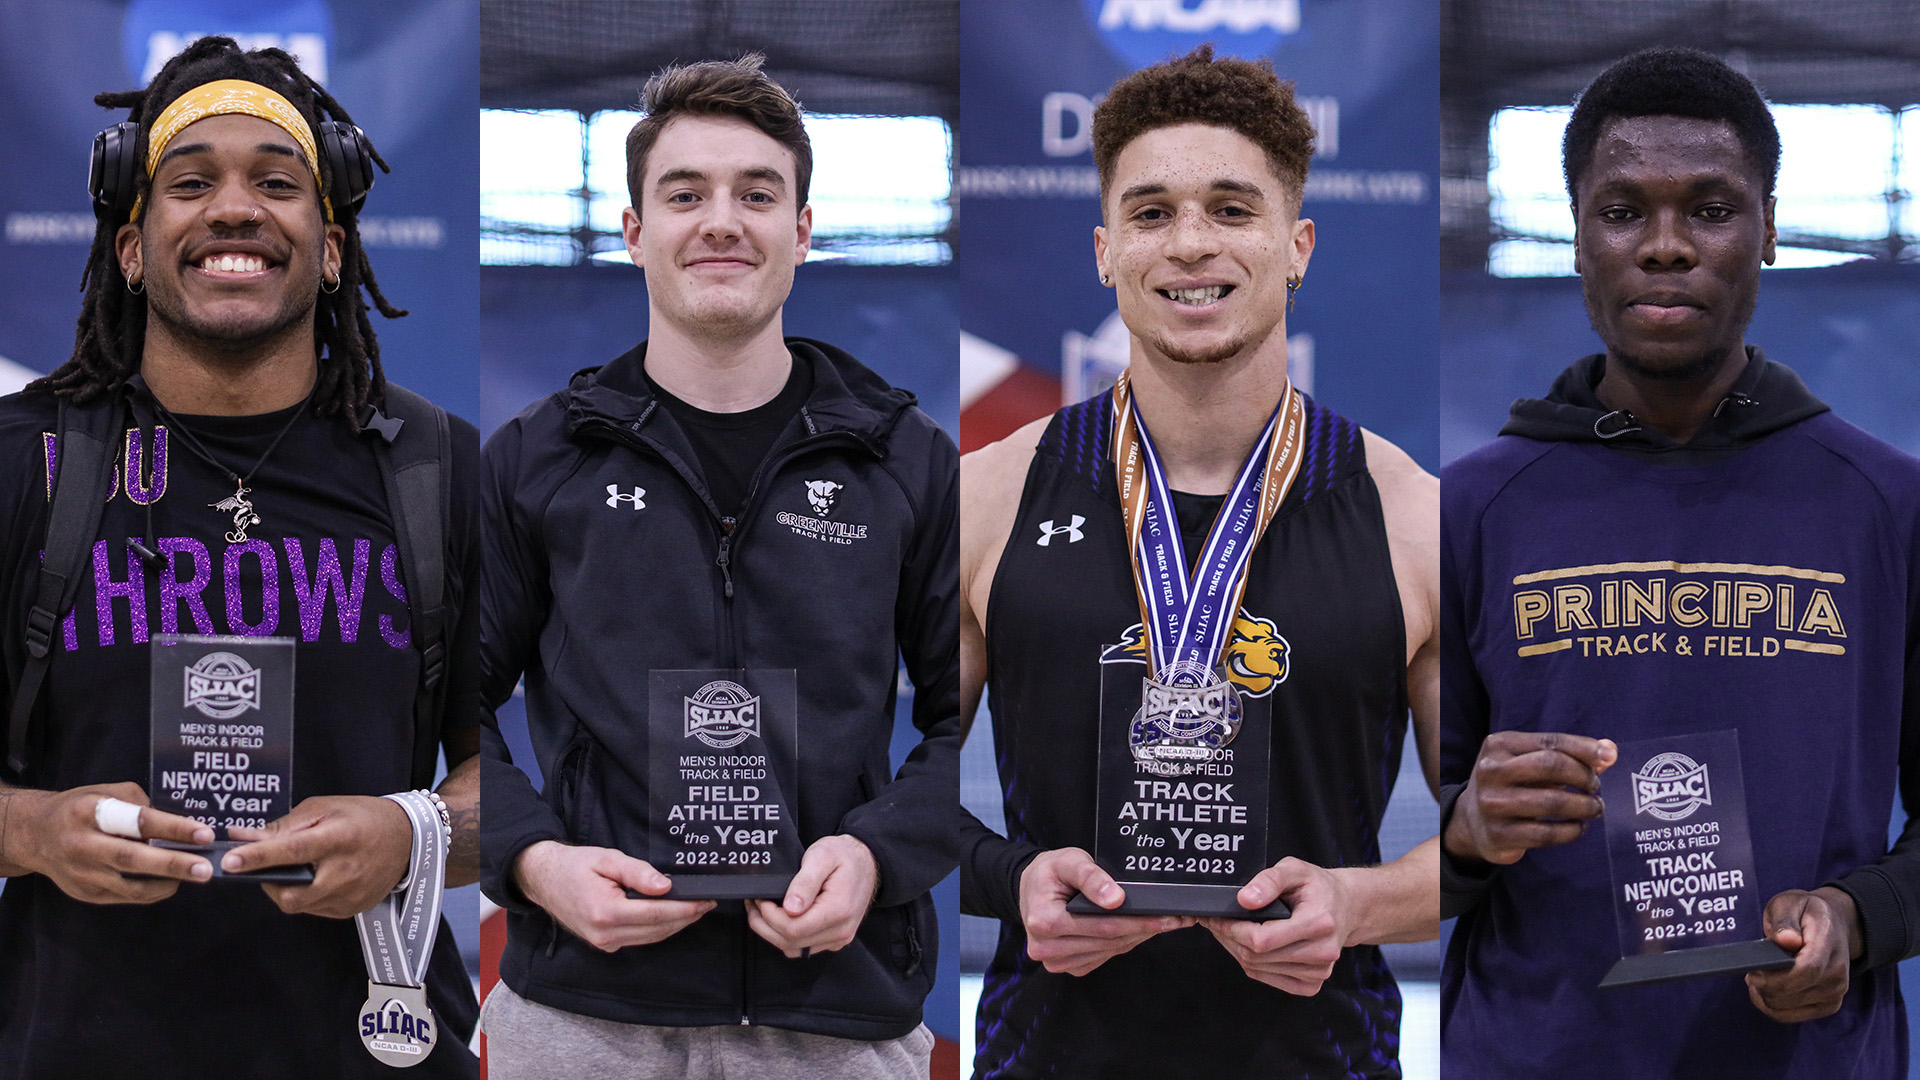 Balance Among Top Award Winners in Men's Track and Field